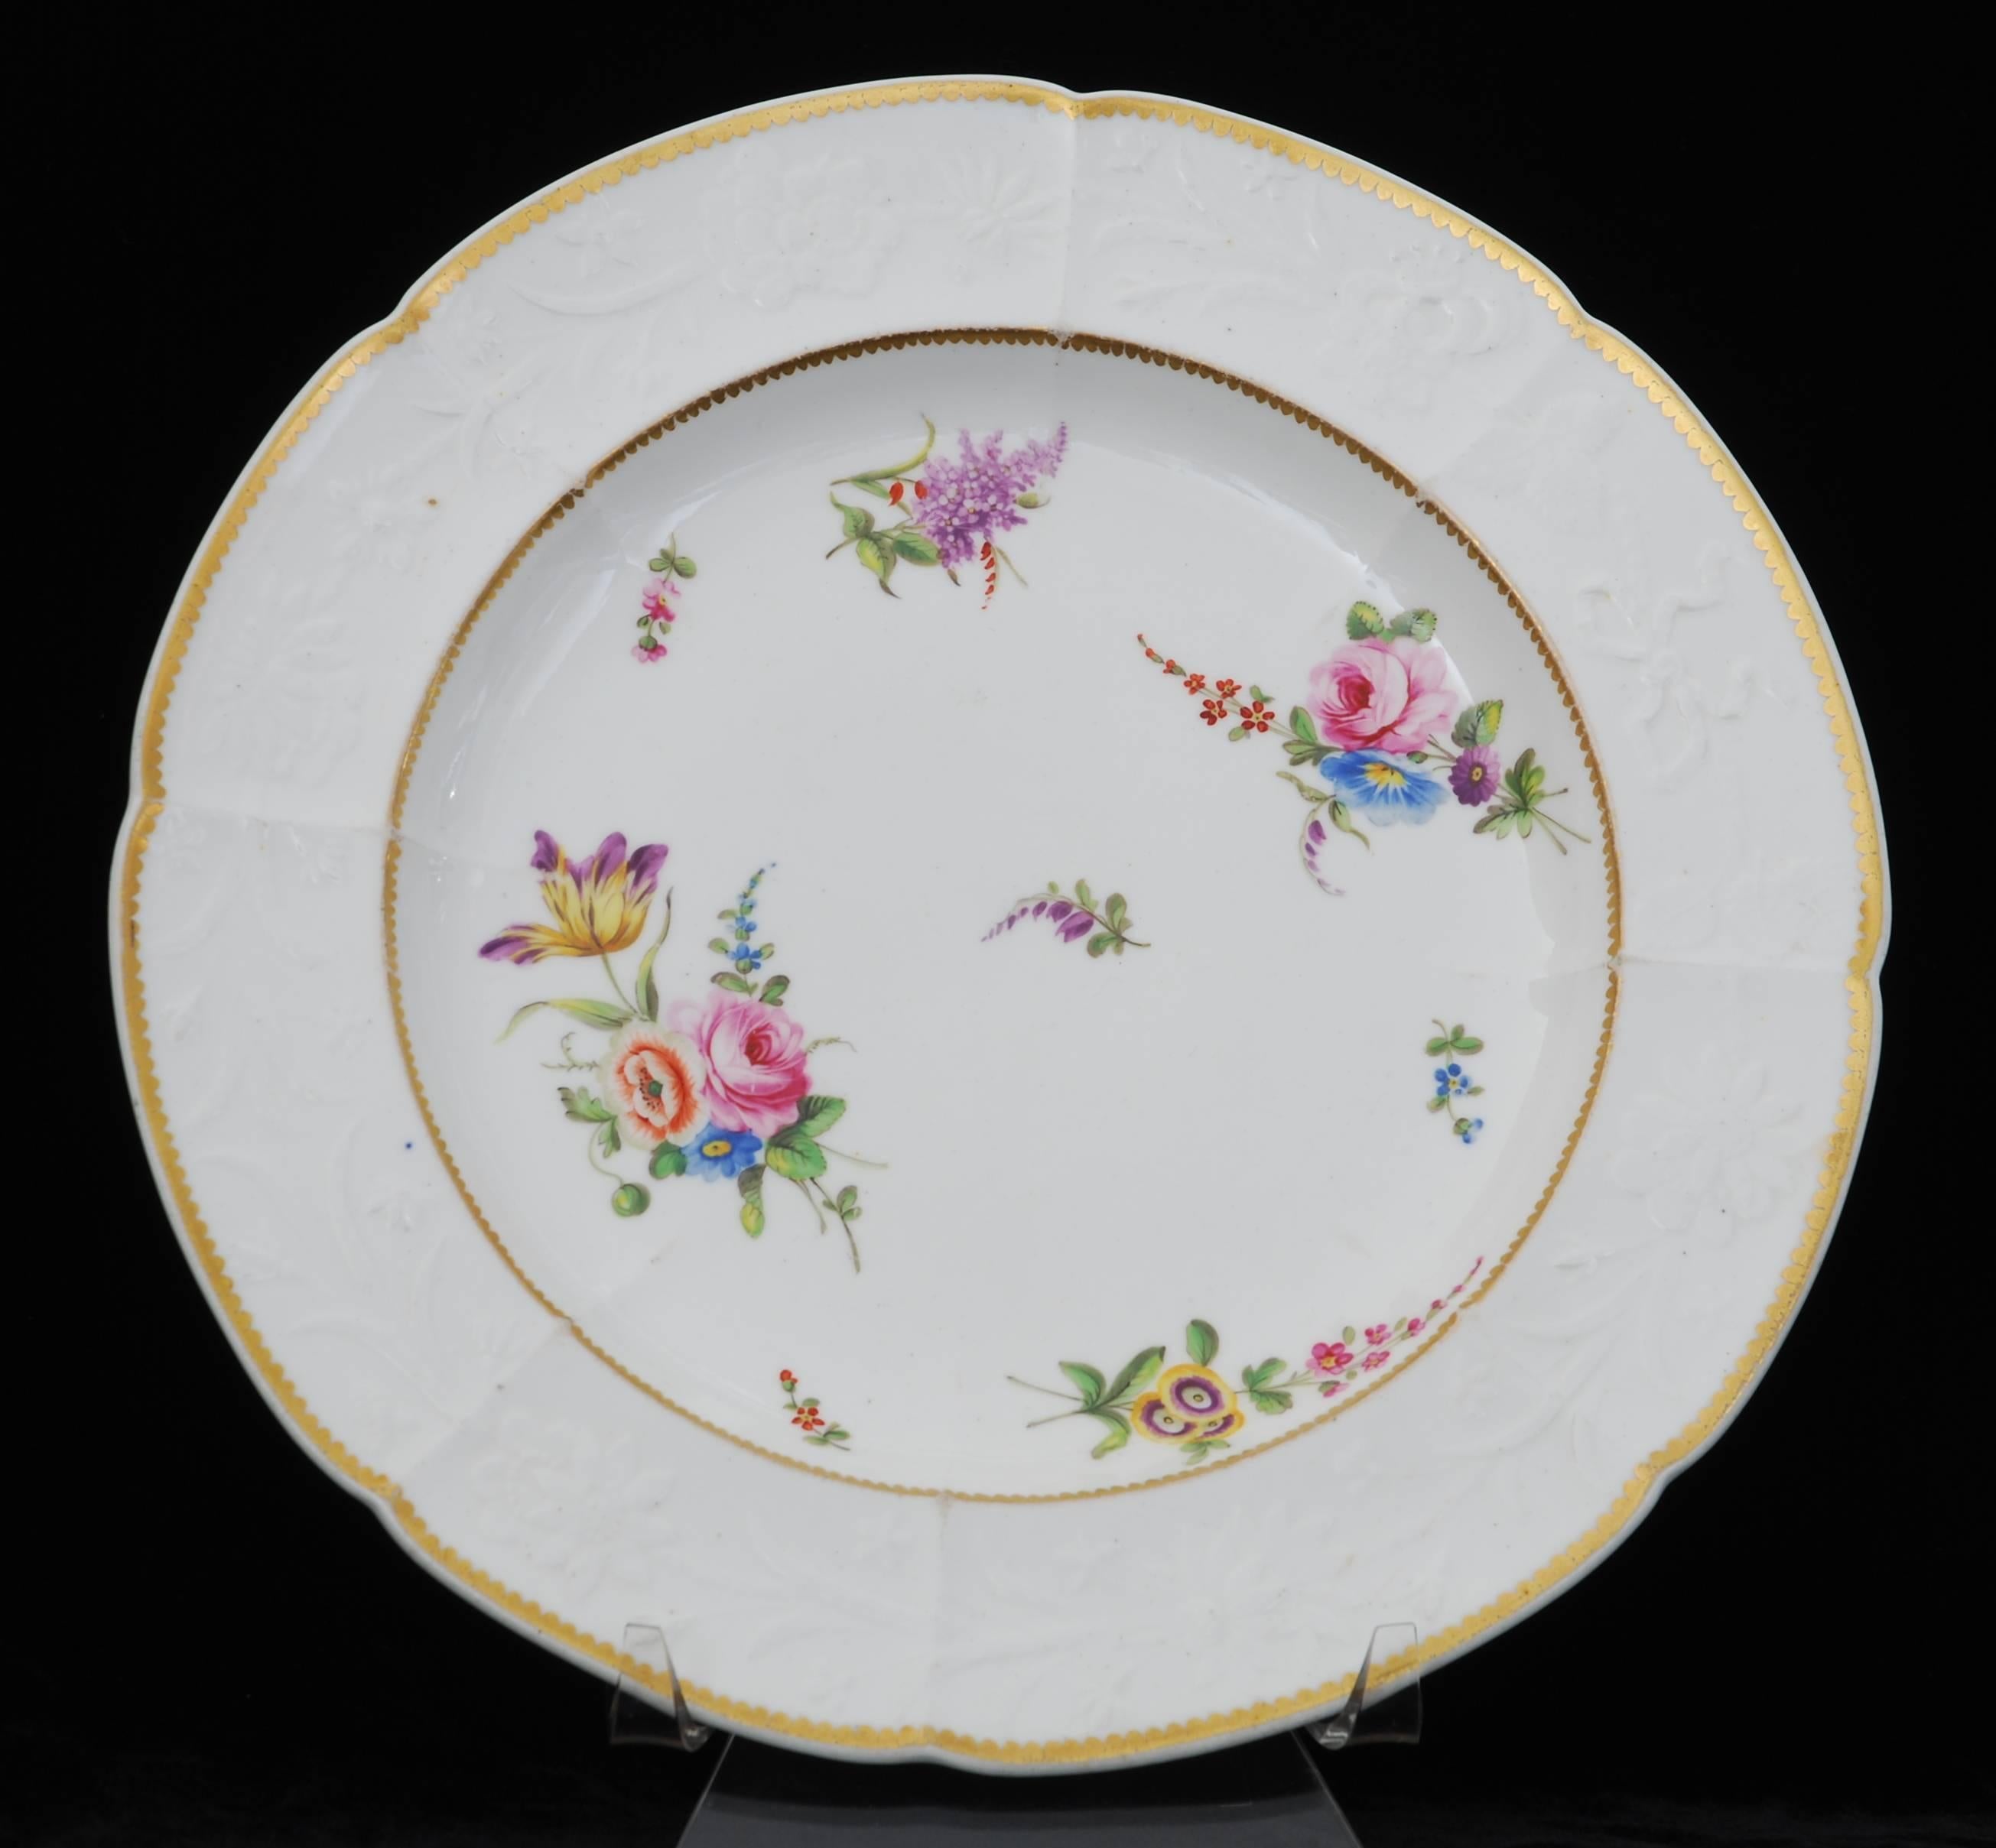 A fine pair of plates in the incomparable Nantgarw body; decorated in London with naturalistic sprays of flowers.